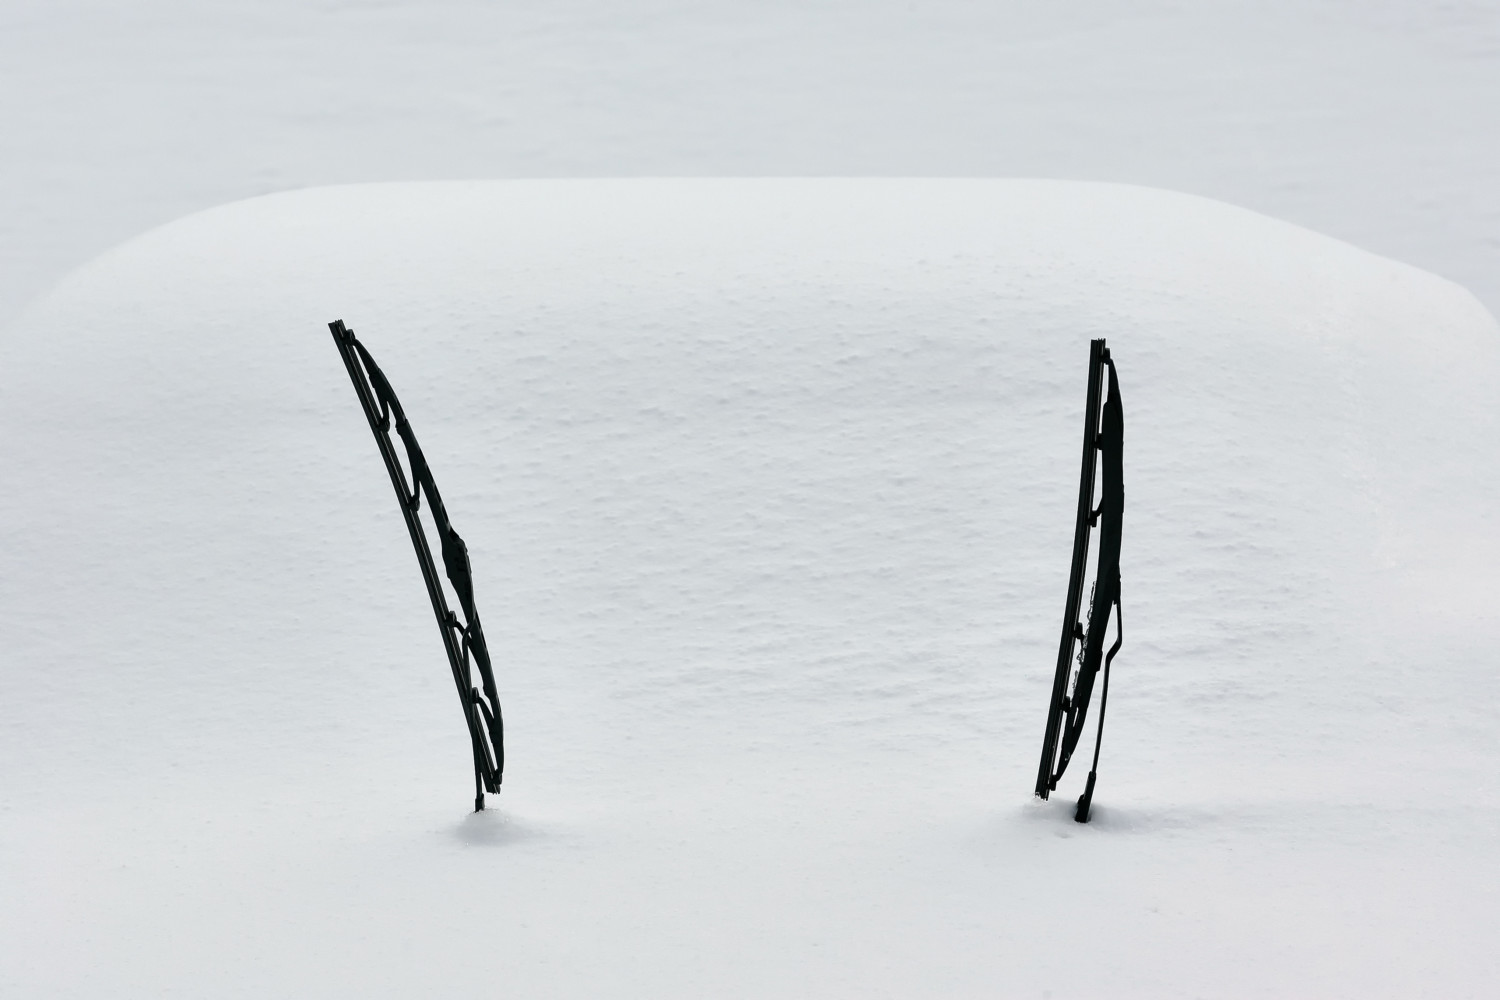 windshield wipers left up in snow